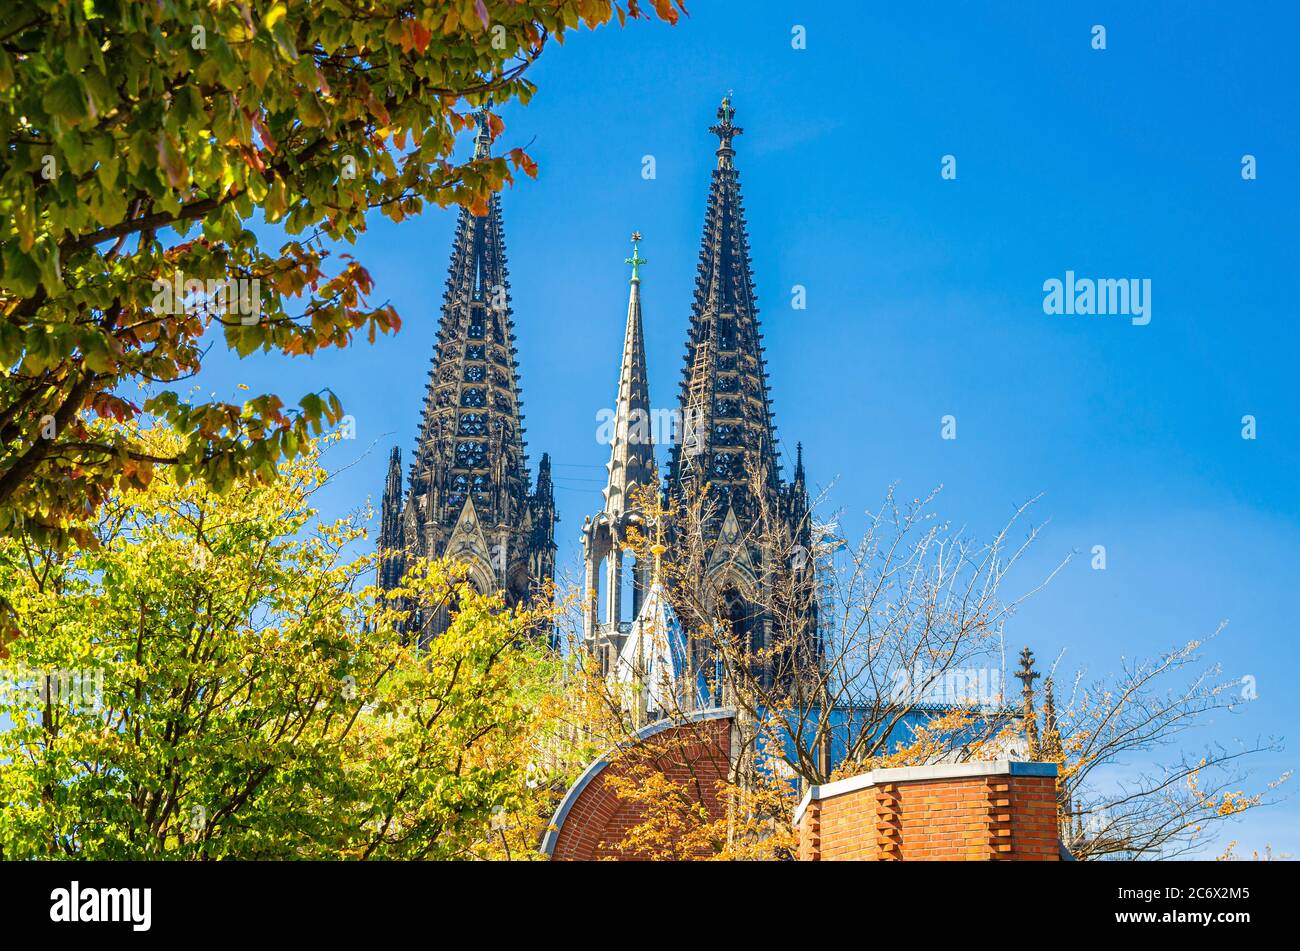 Two huge spires of Cologne Cathedral Roman Catholic Church Saint Peter gothic architectural style building and tree crown with green leaves foreground, blue clear sky, North Rhine-Westphalia, Germany Stock Photo